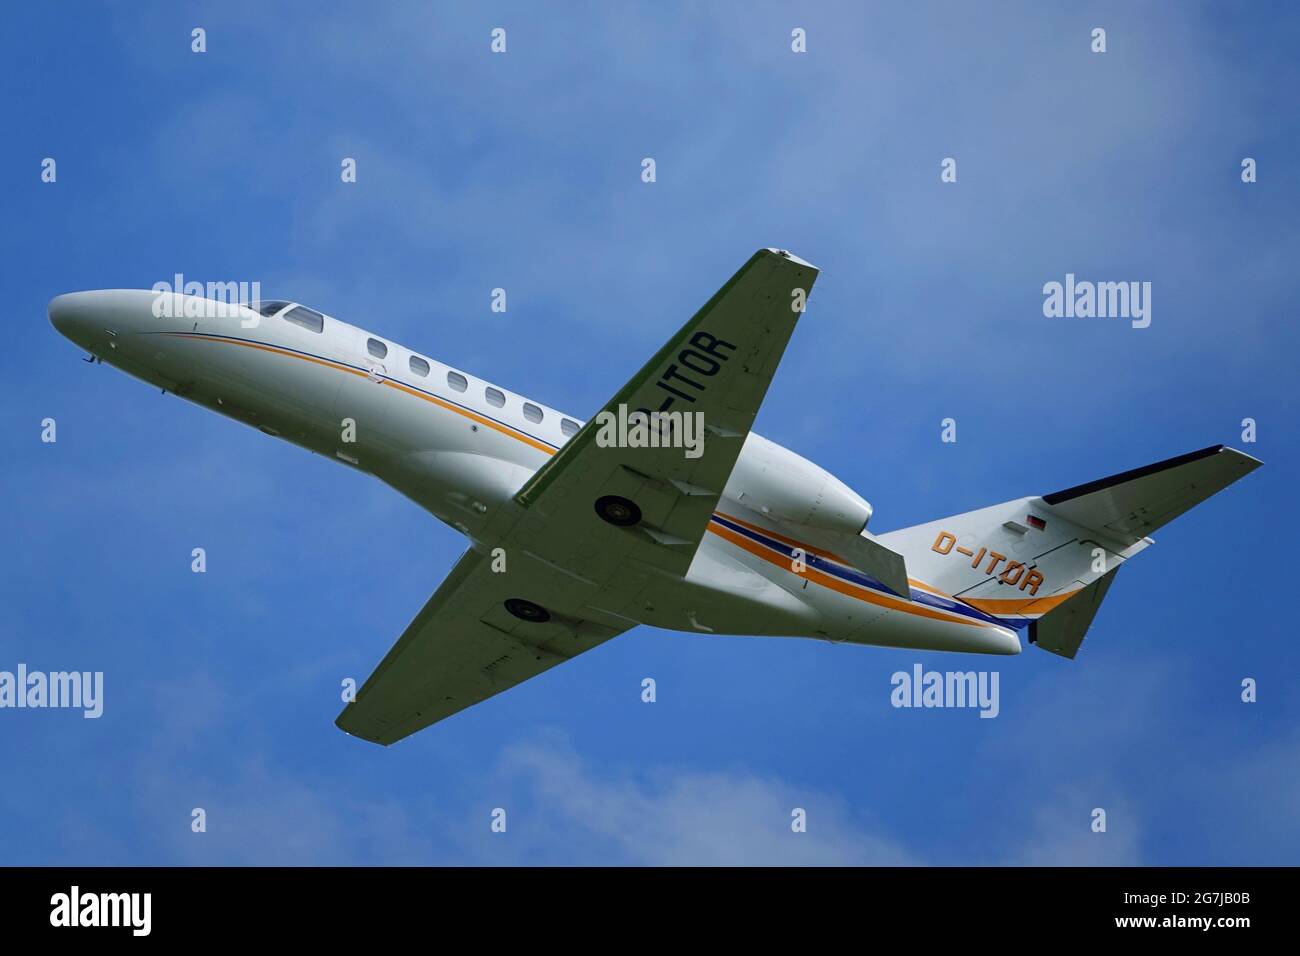 WILHELMSHAVEN, GERMANY - Aug 01, 2020: In flight shot of a white Cessna 525 Citation business jet in front of blue sky Stock Photo